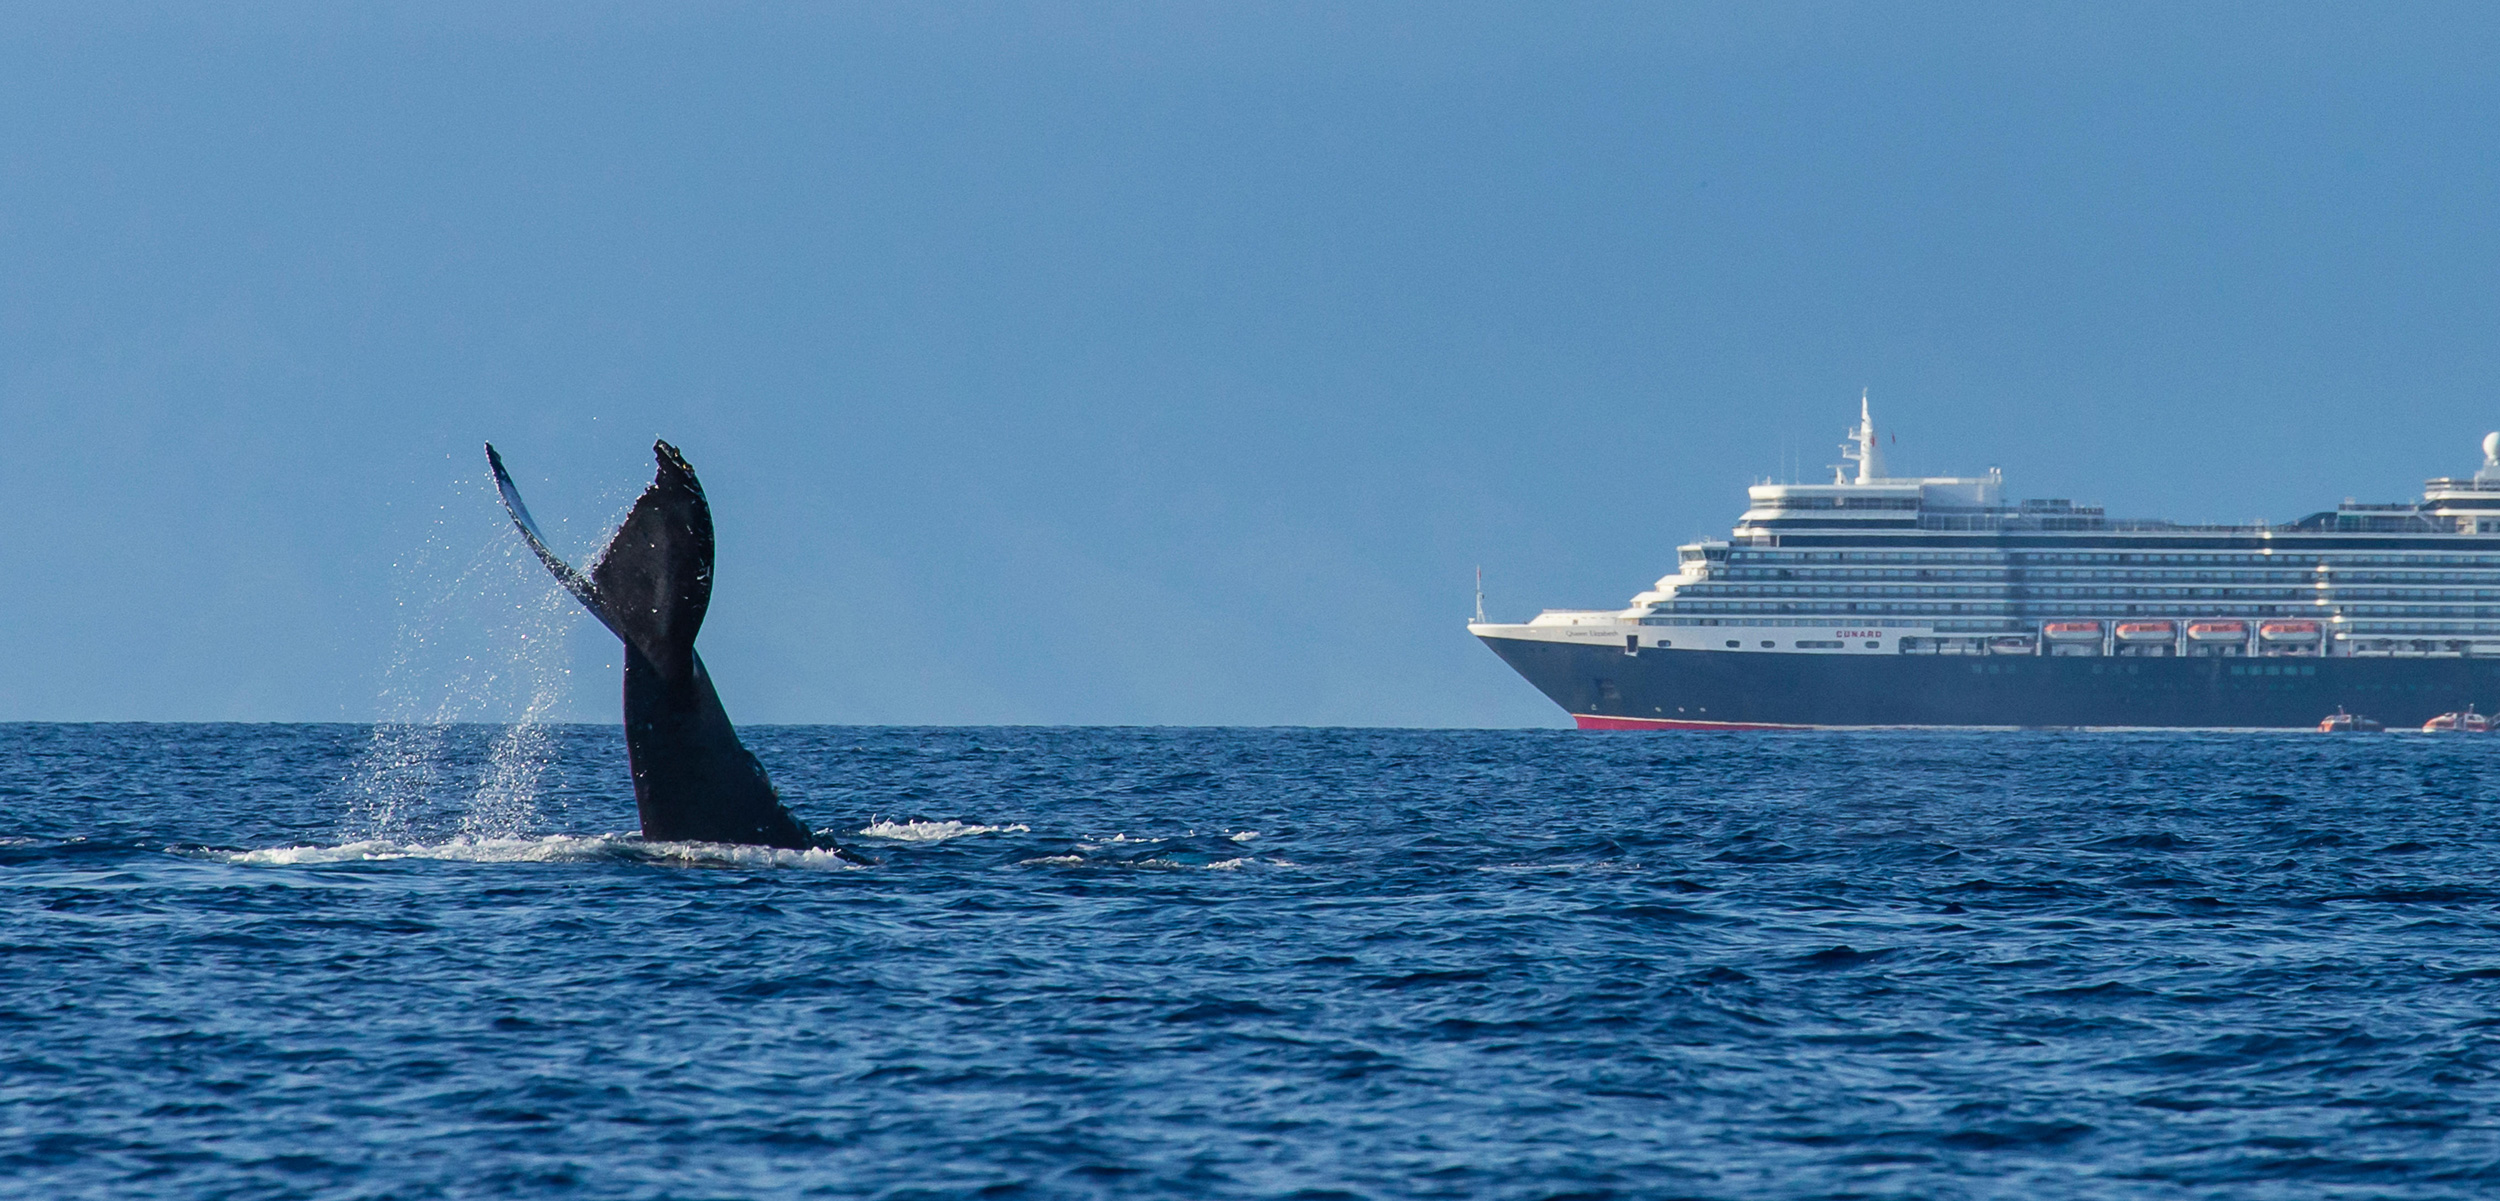 Why Don't Whales Get Out of the Way? | Hakai Magazine